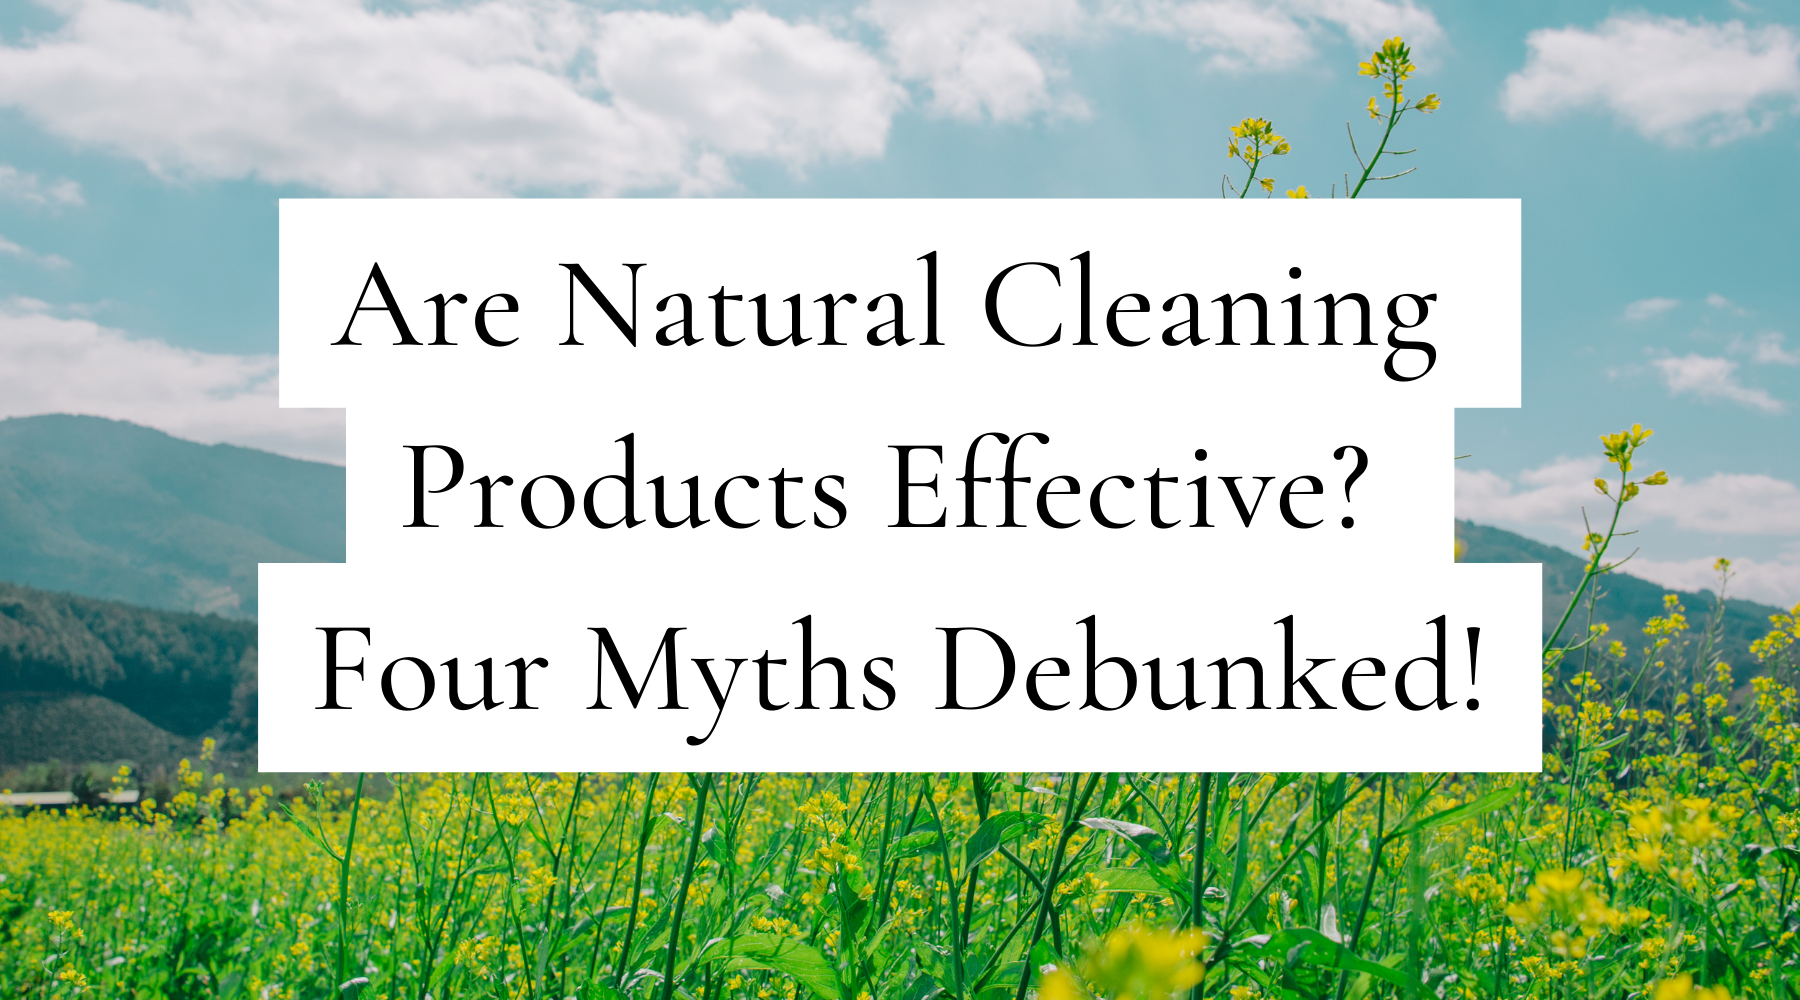 Are Natural Cleaning Products Effective? Four Myths Debunked!